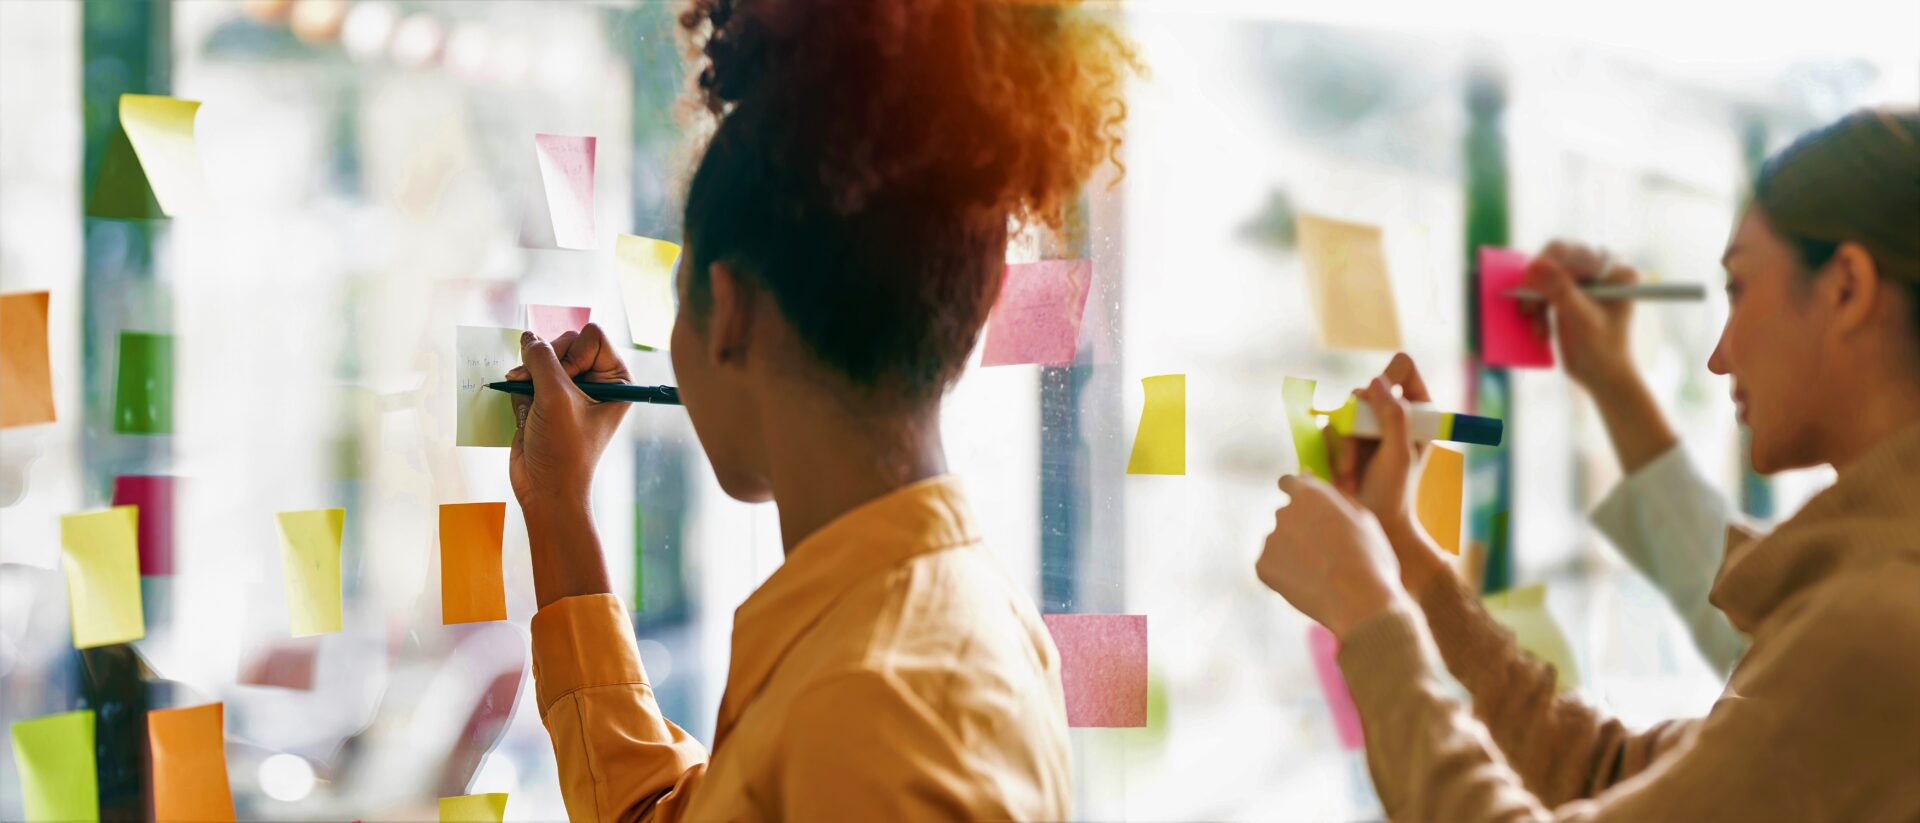 Women write on sticky notes on a wall